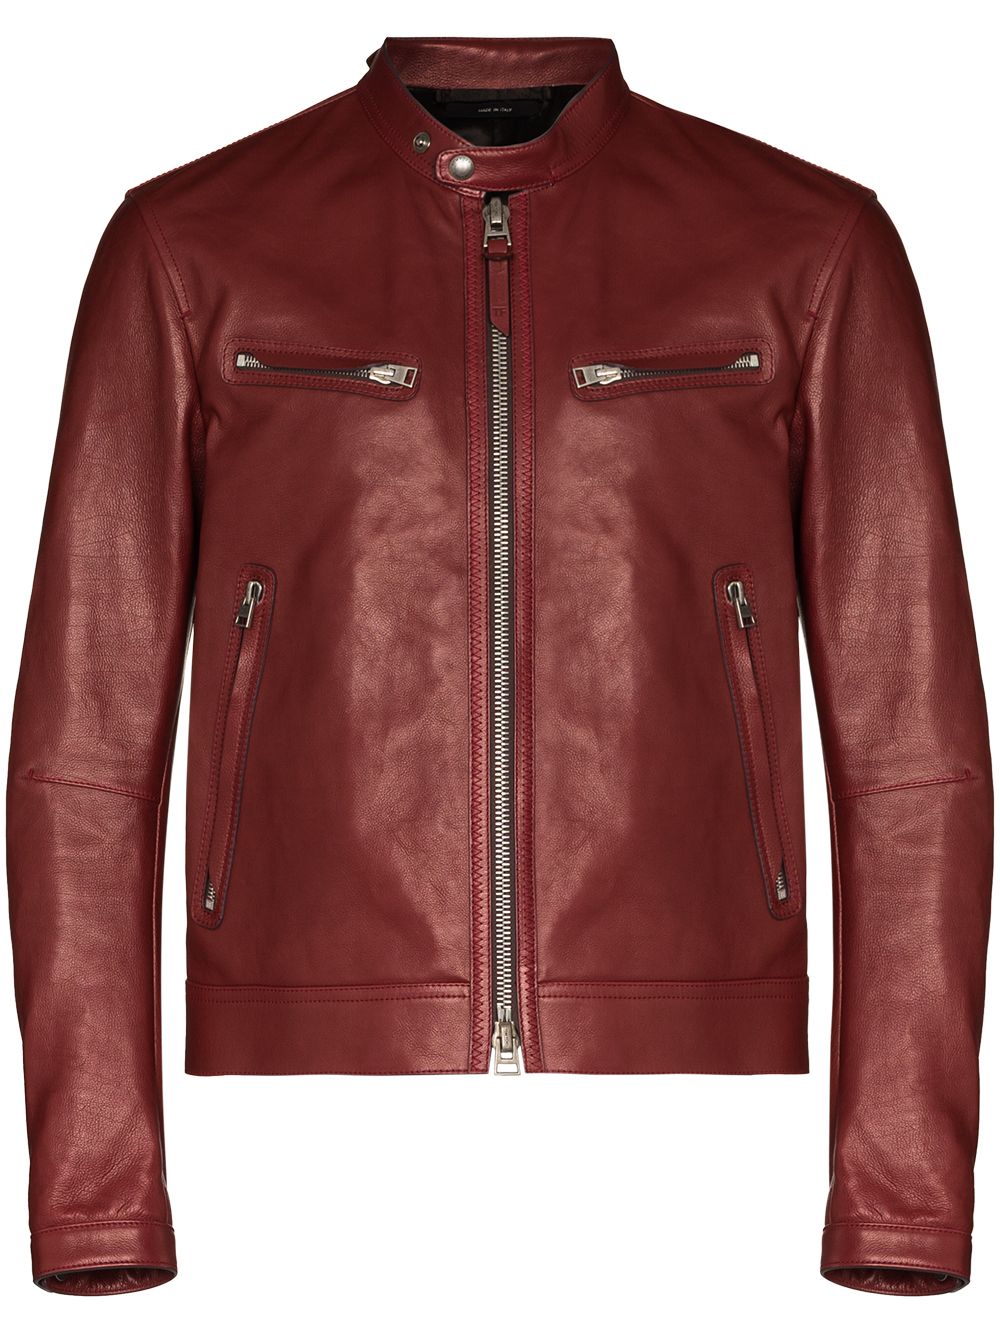 TOM FORD ZIPPED LEATHER JACKET